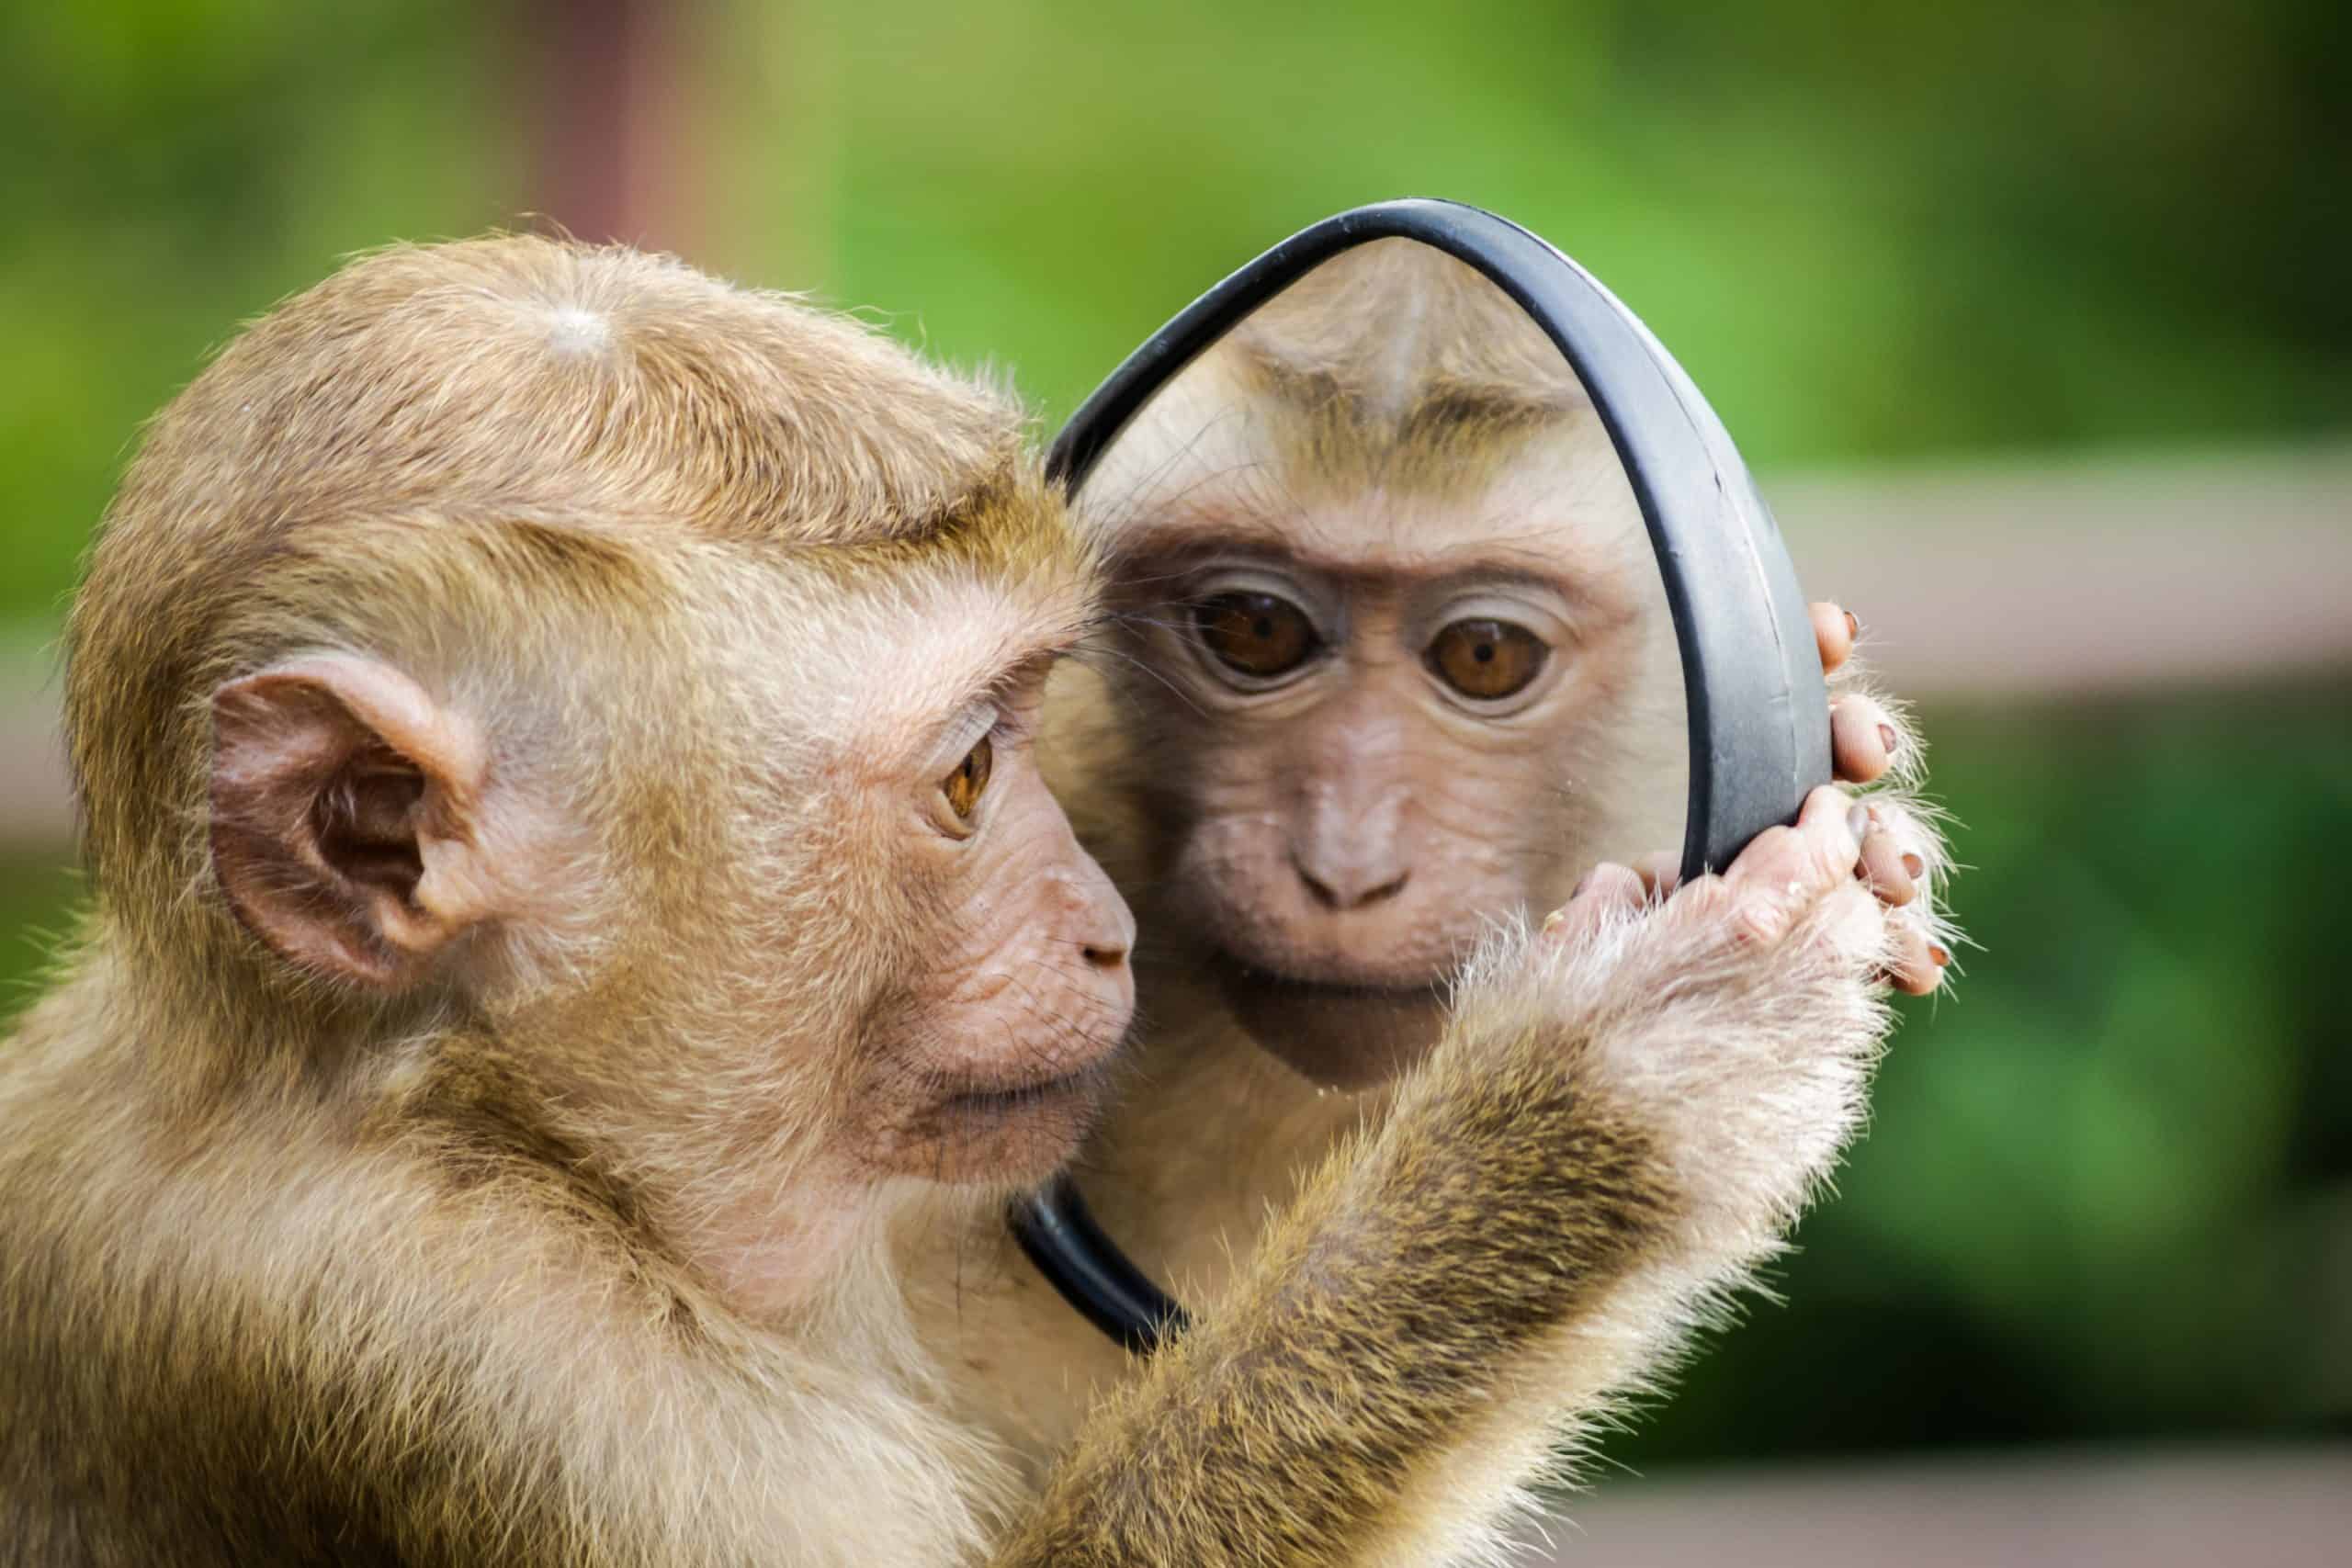 Monkey looking in a mirror at its reflection